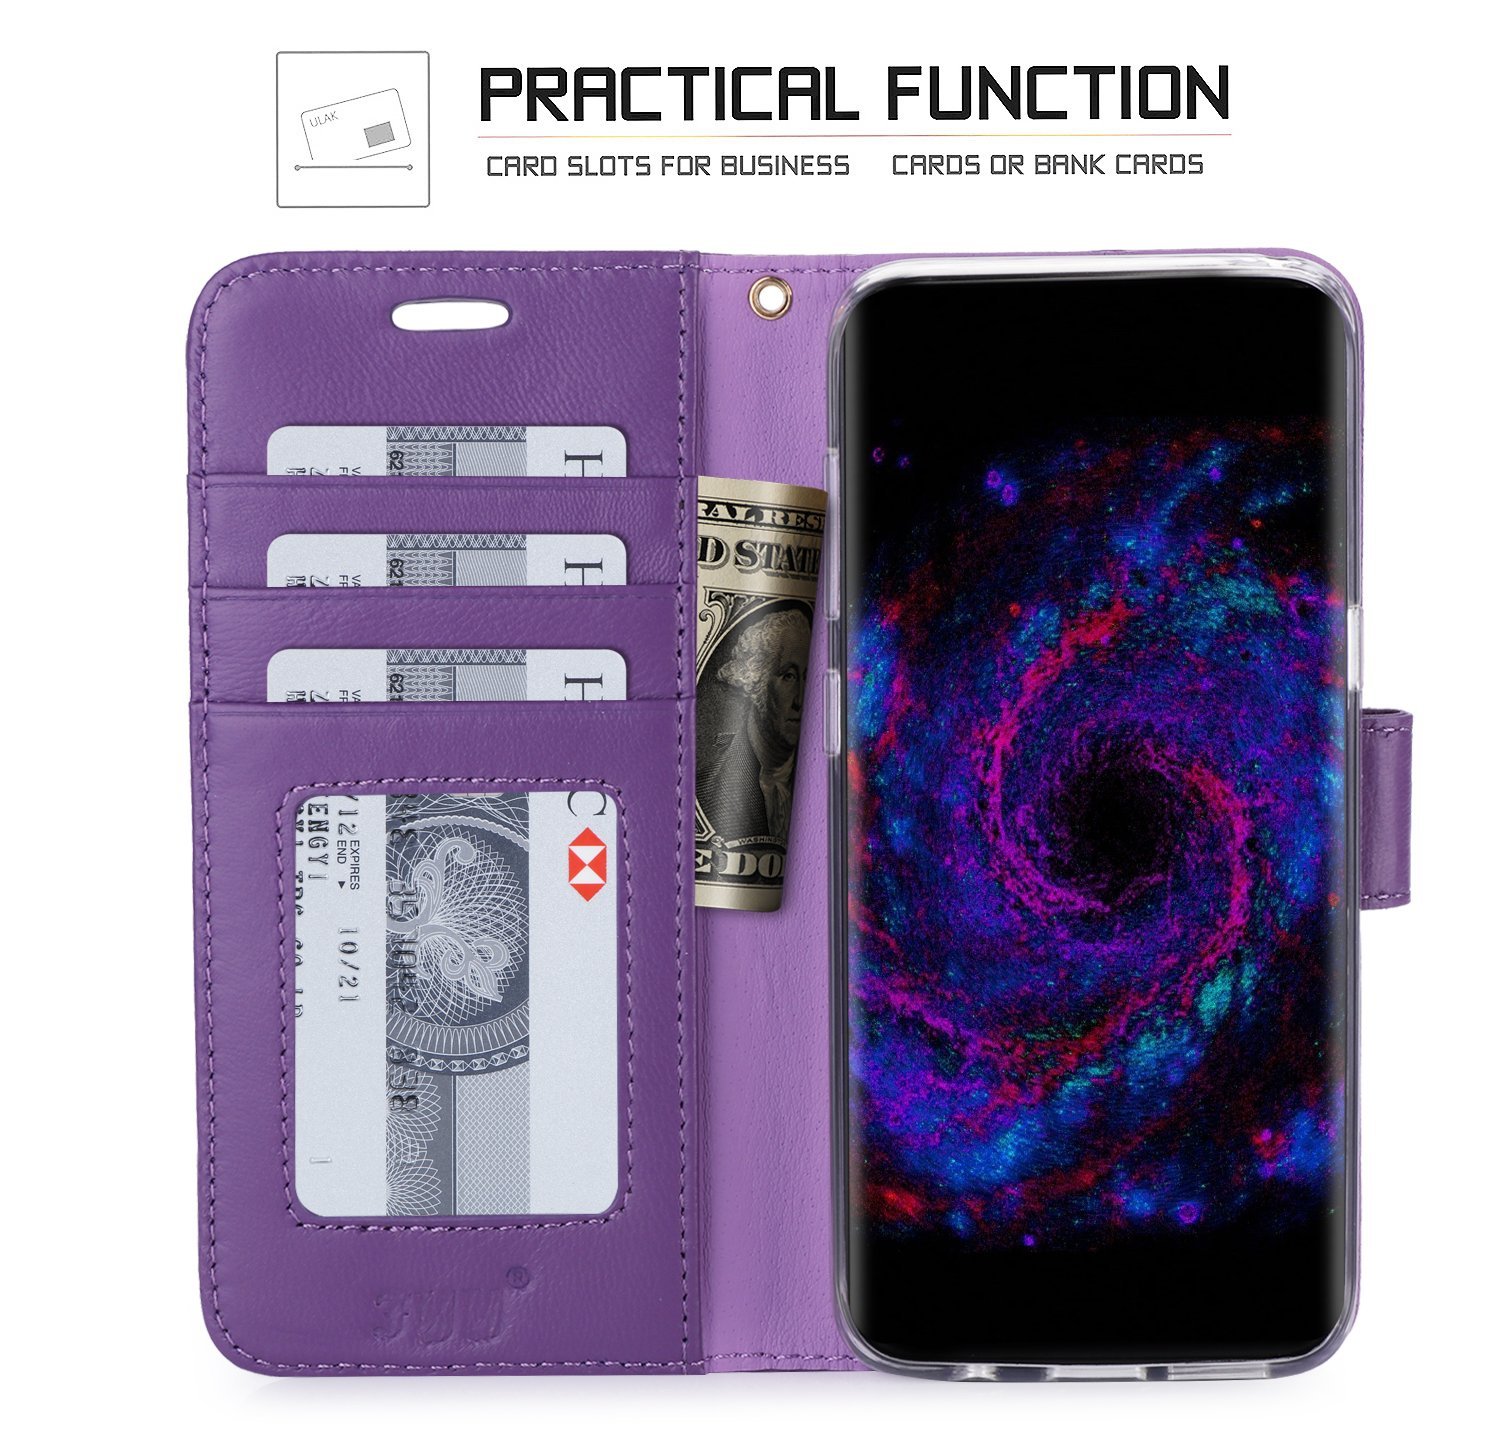 Galaxy S8 Case, Samsung Galaxy S8 Case, [RFID Blocking wallet Case] 100% Handmade Flip Folio Case [Kickstand Feature] With ID&Credit Card Protector for Samsung Galaxy S8(NOT for S8 Plus) Purple - image 3 of 6